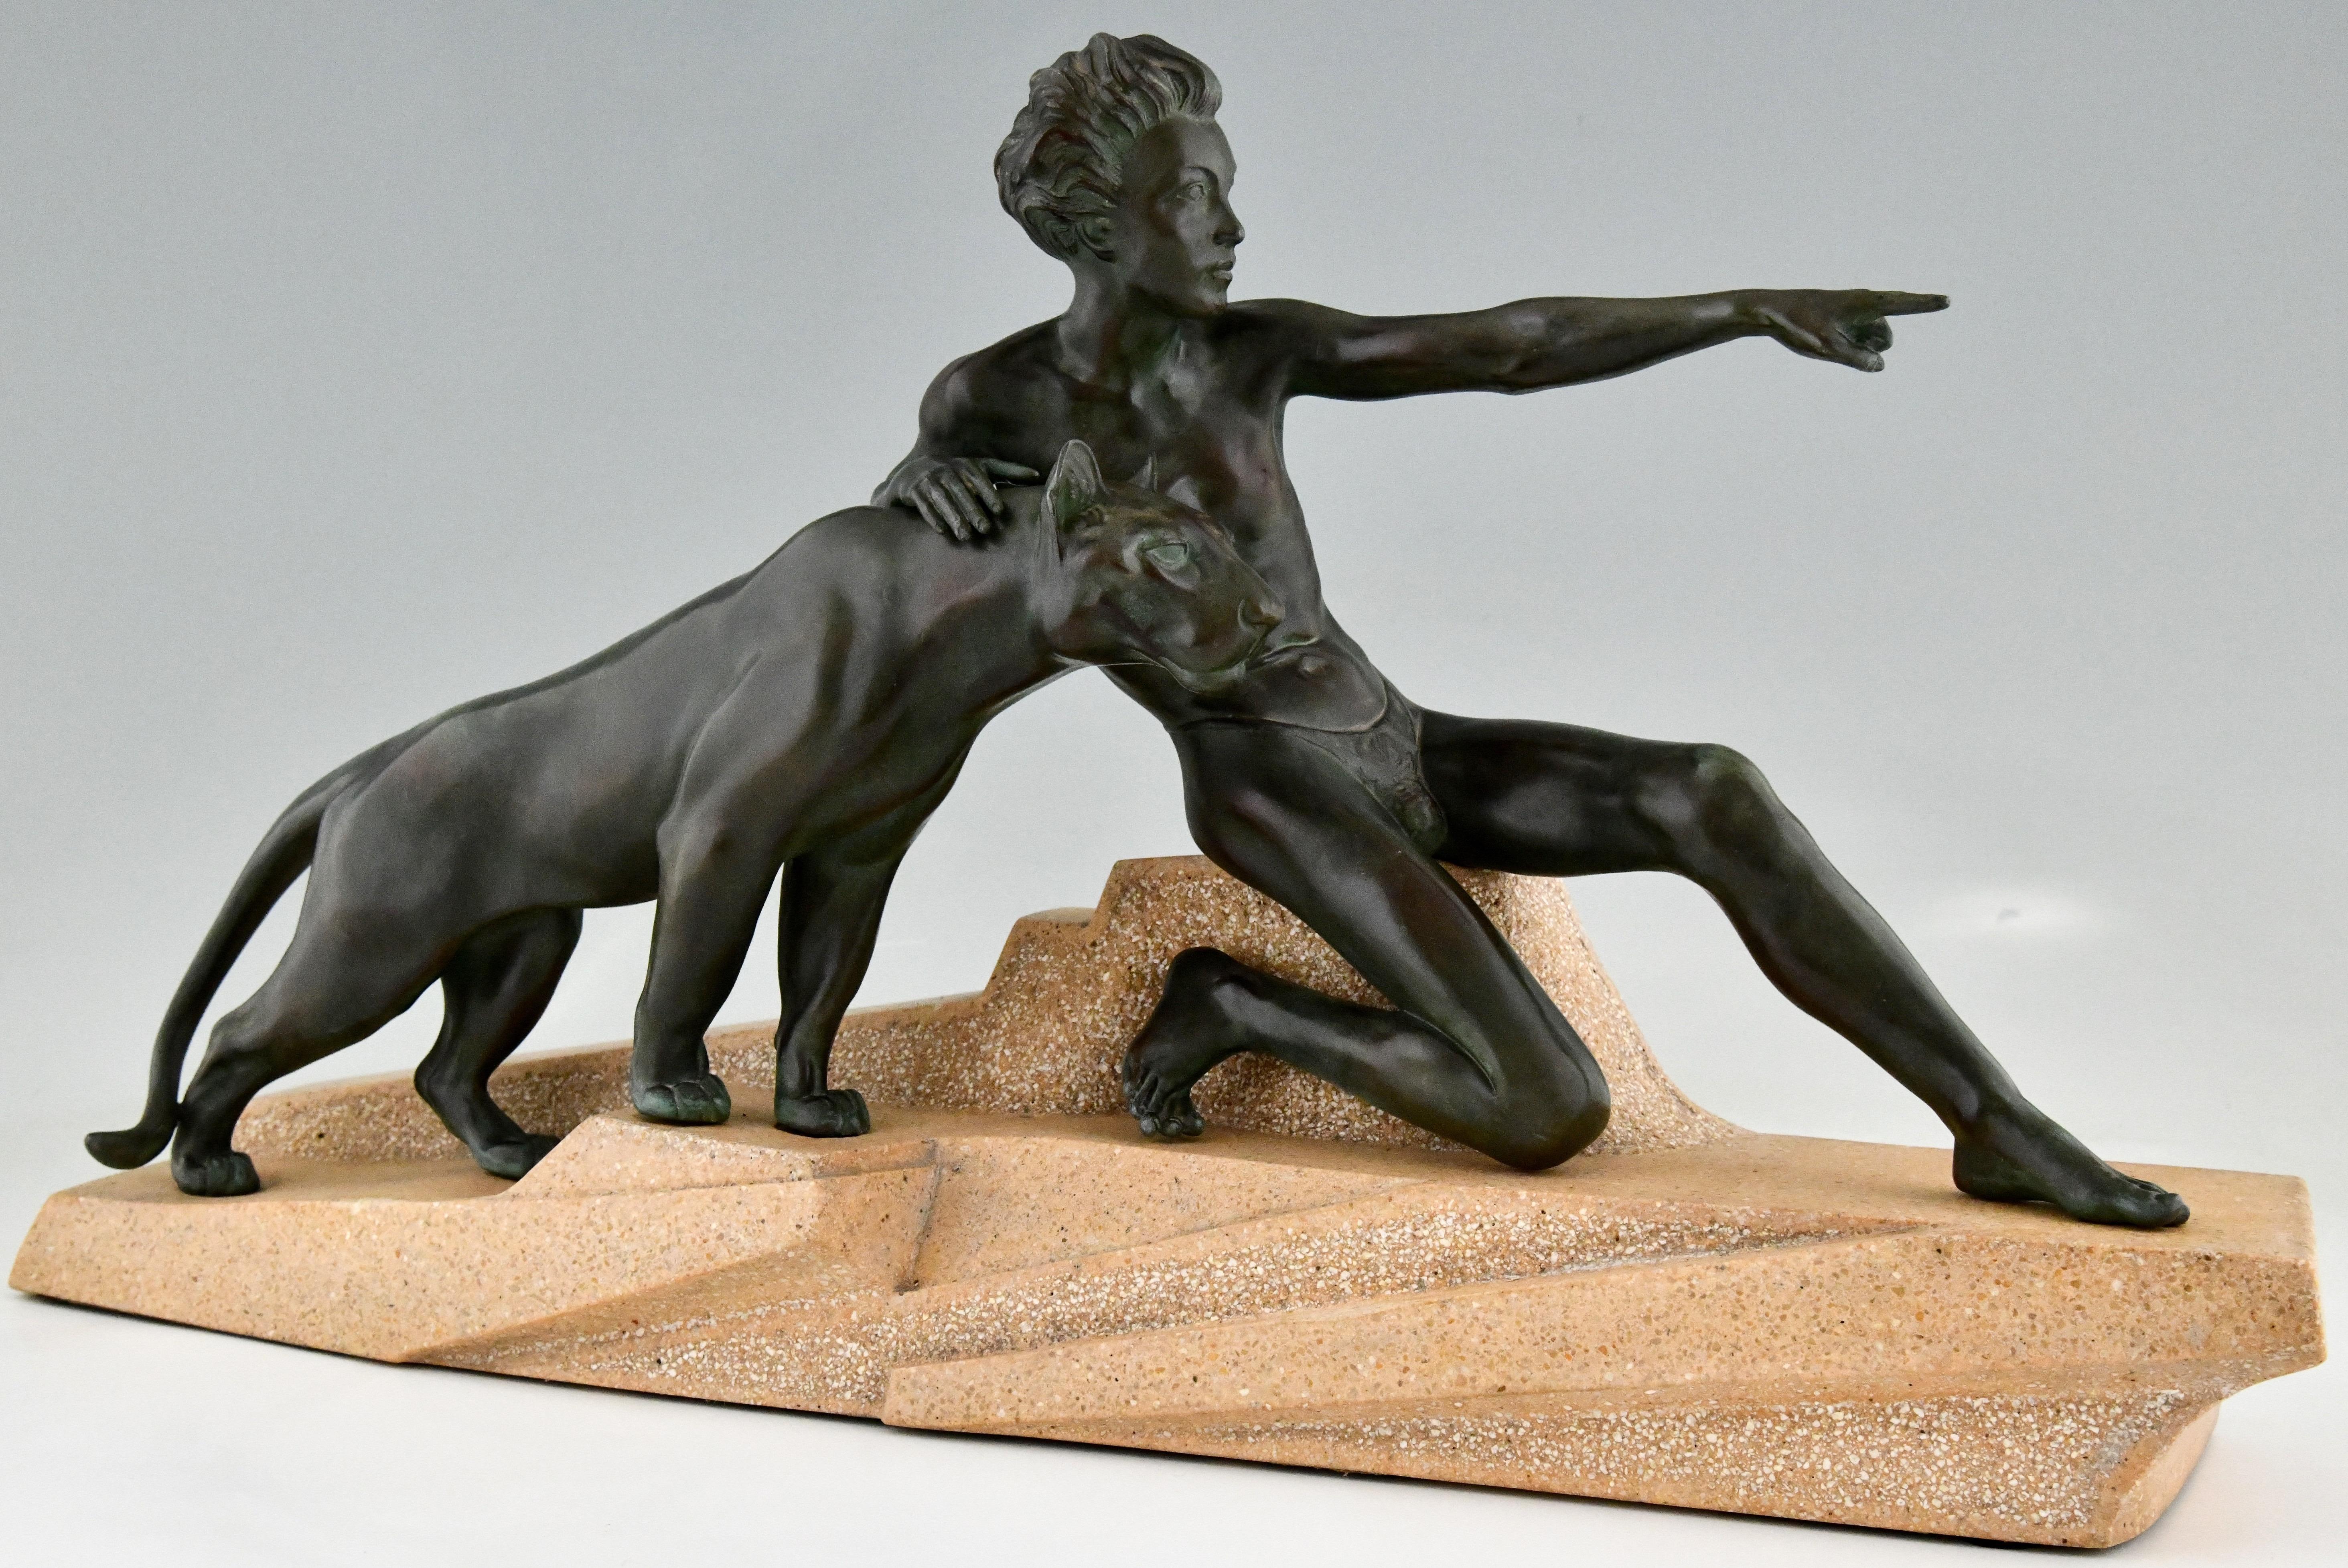 Art Deco sculpture young man with panther by Max Le Verrier. 
The sculpture is executed in patinated Art metal and stands on a carved stone base. 
France 1930. 
Literature:
Art Deco sculpture by Alistair Duncan.
Statuettes of the Art Deco